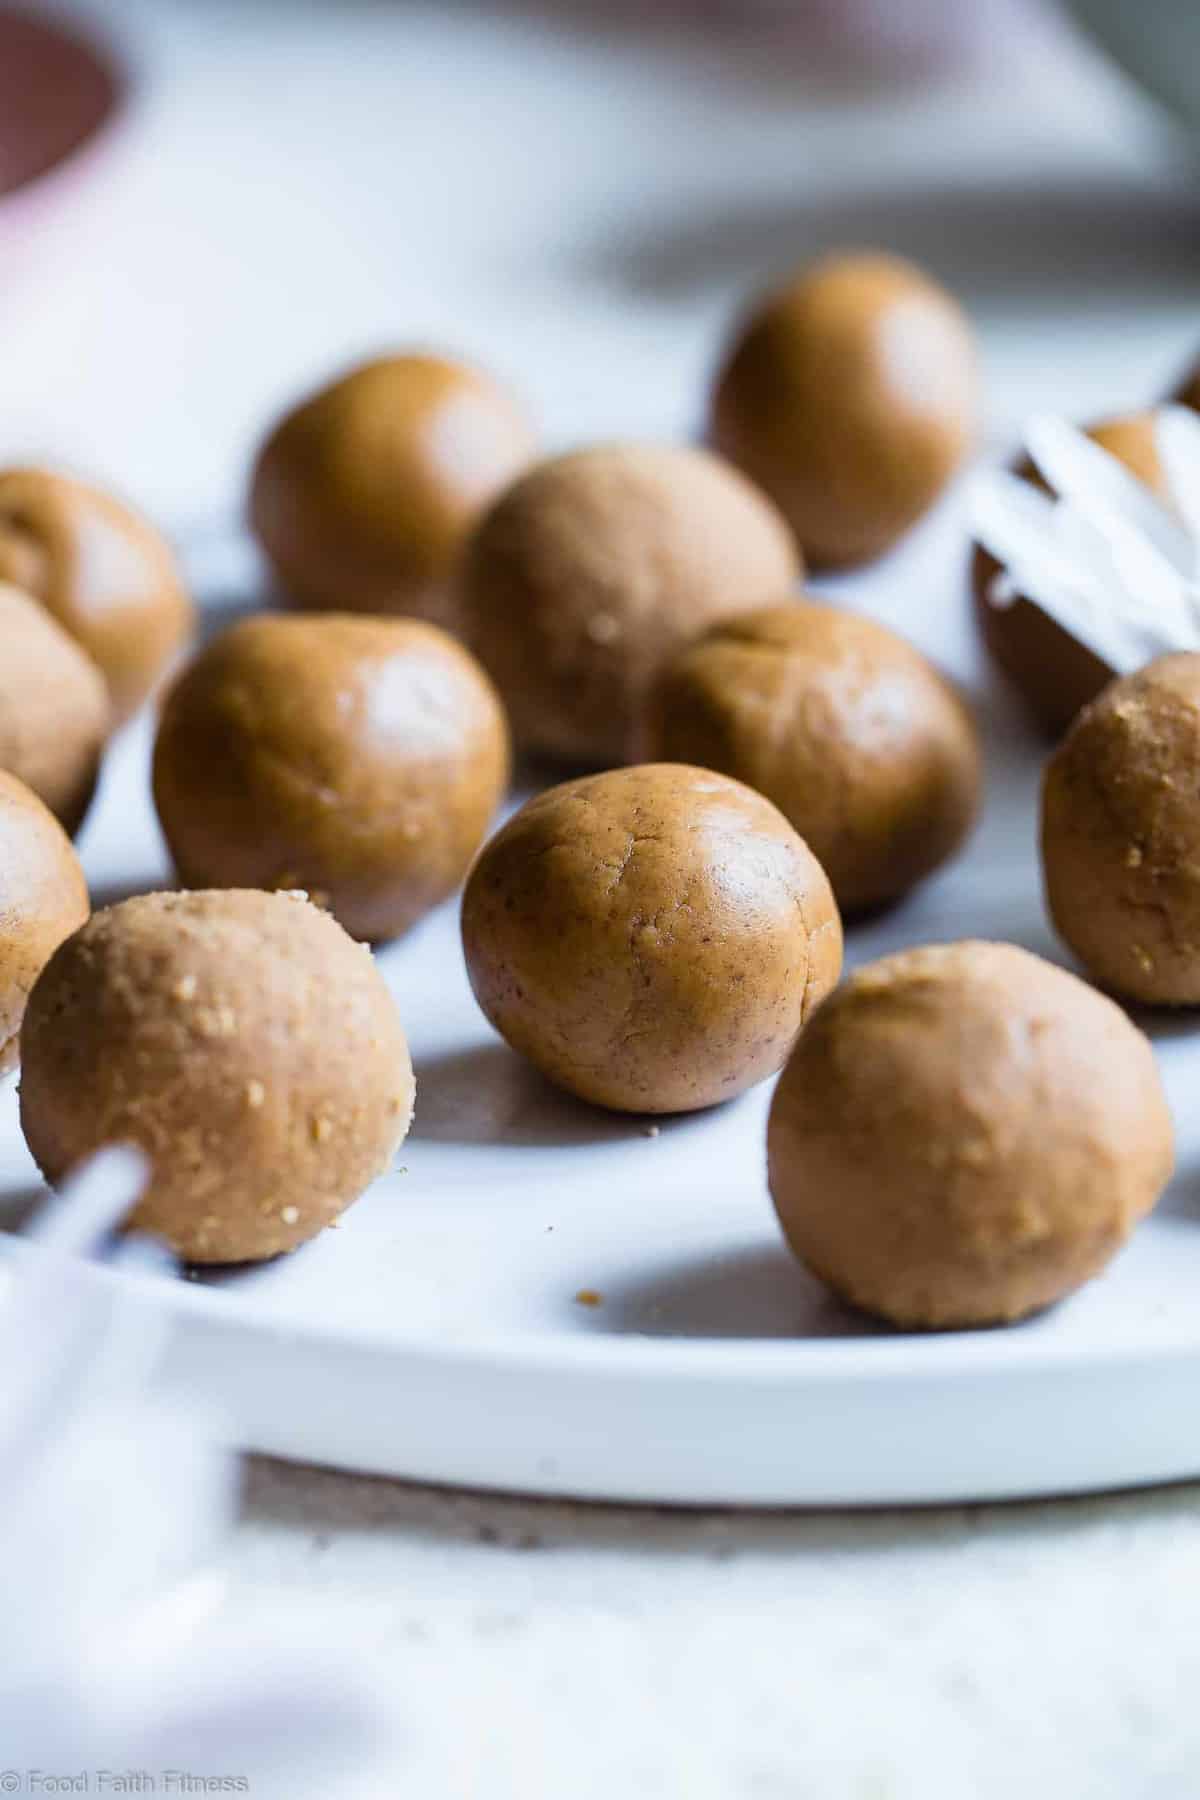 Peanut Butter Protein Healthy Cookie Dough Balls Recipe - This easy recipe is only 4 ingredients and take 10 mins! Gluten free, dairy free and PACKED with protein too! A healthy snack for kids or adults! | #Foodfaithfitness | #Glutenfree #Dairyfree #PeanutButter #Healthy #CookieDough